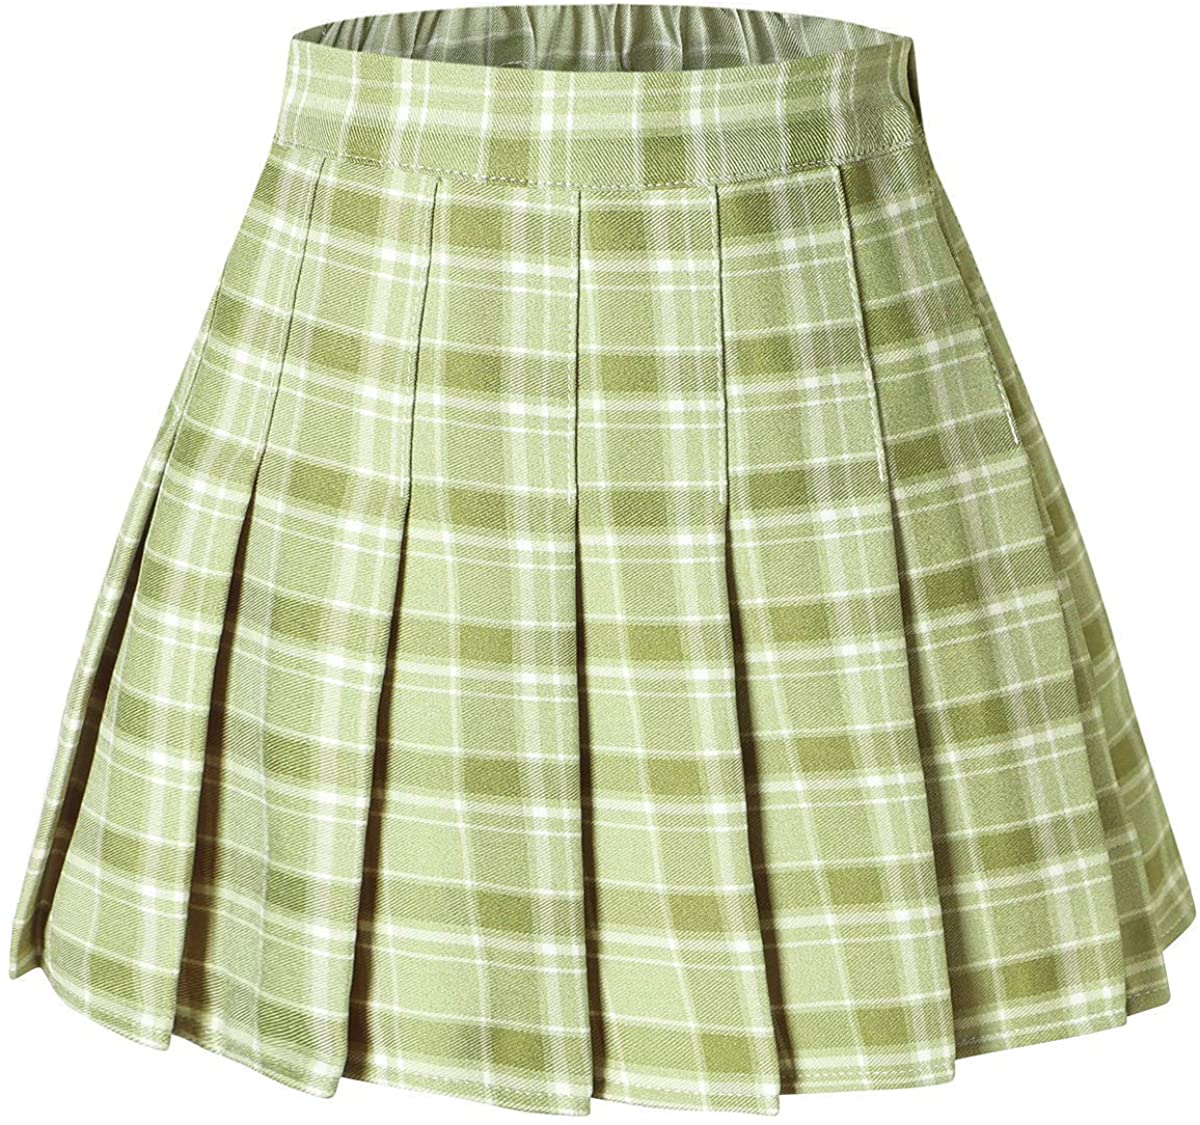 2 Years US 2XL SANGTREE Girls Women's Pleated Skirt with Comfy Stretchy Band 